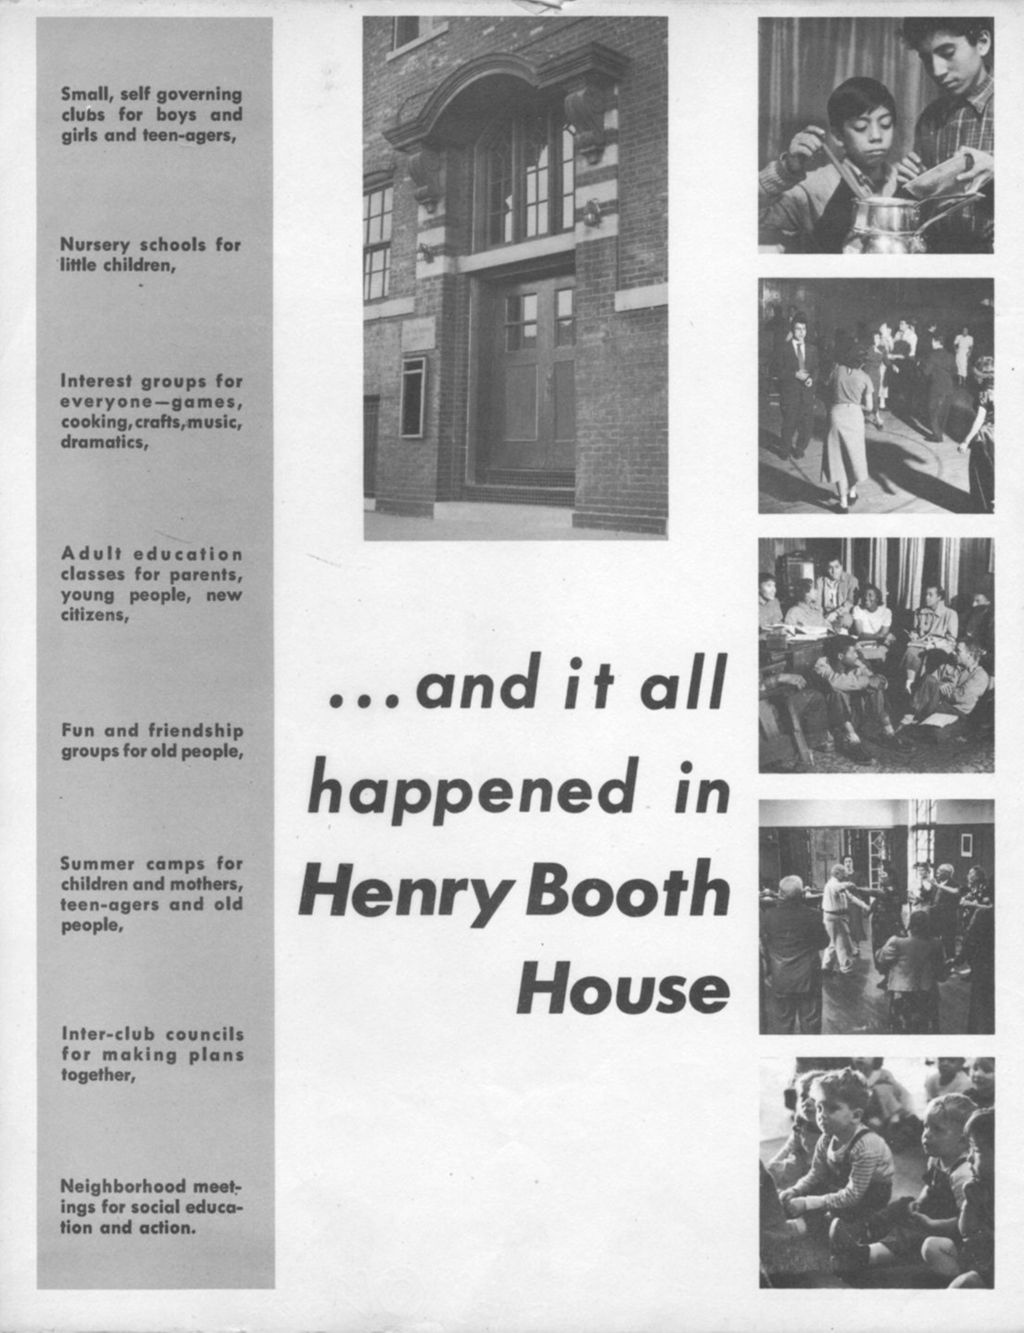 Miniature of Henry Booth House flyer